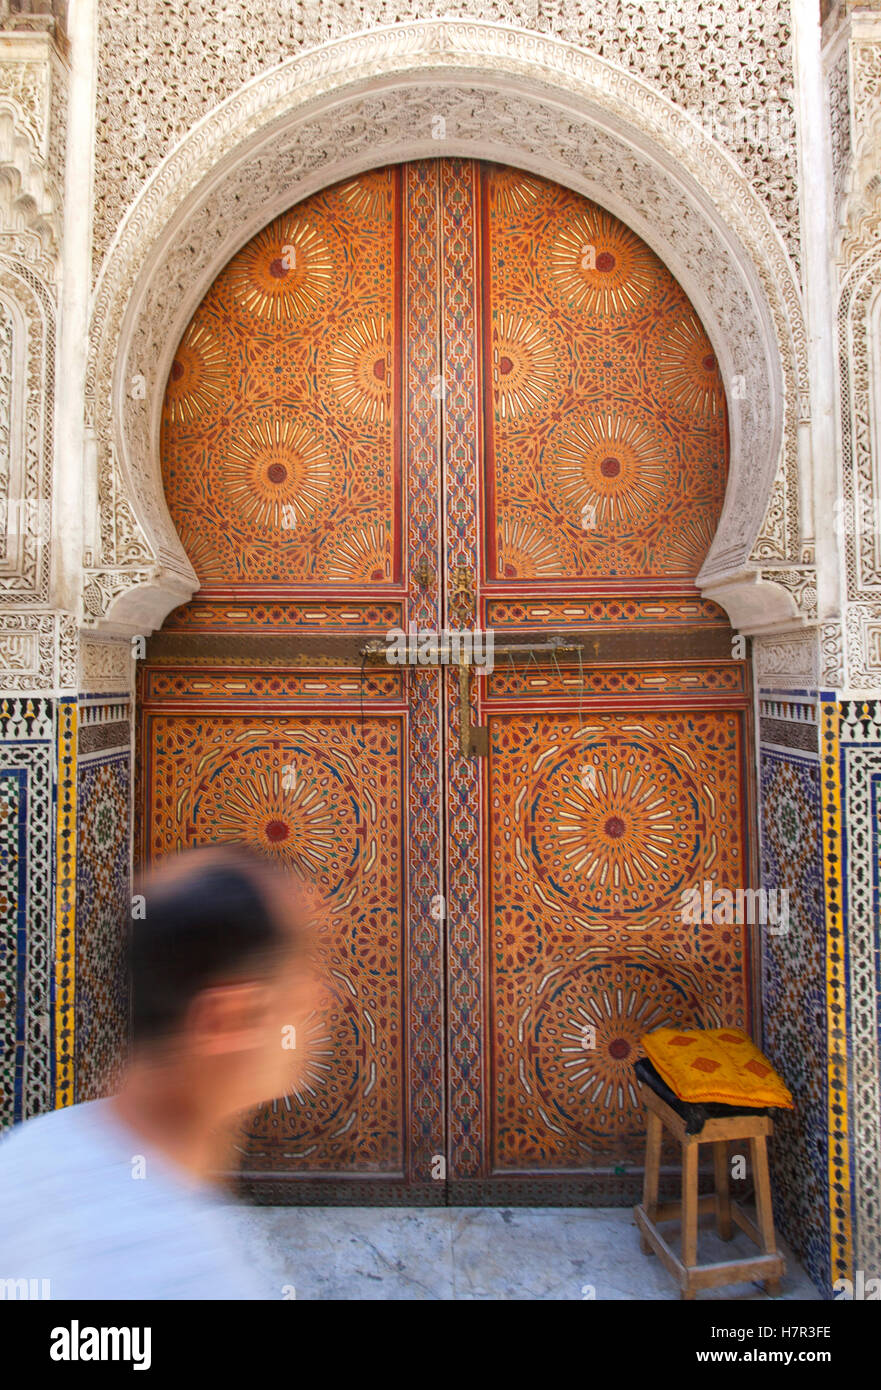 One of the great doors inside the Fez medina, Morocco. Stock Photo